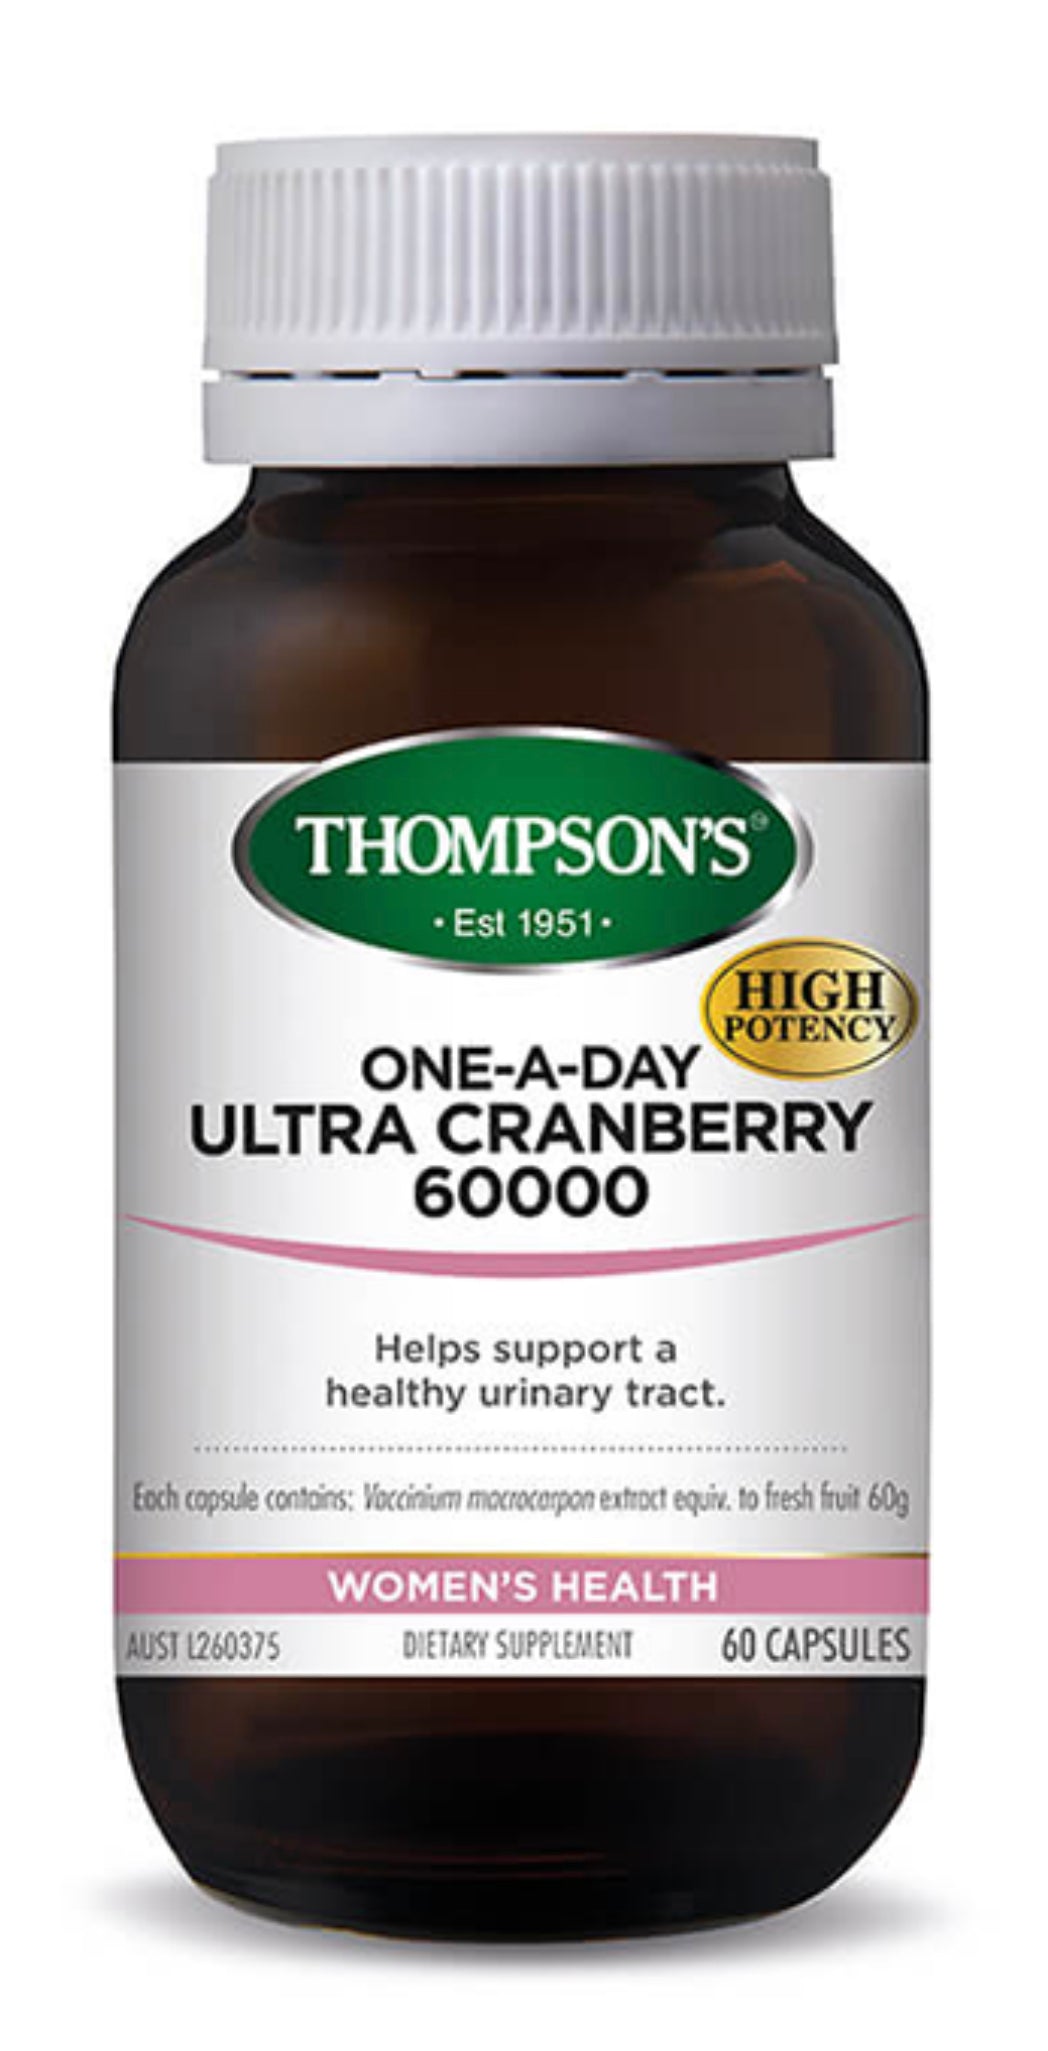 Thompson's One-A-Day Ultra Cranberry 60000mg Capsules 60